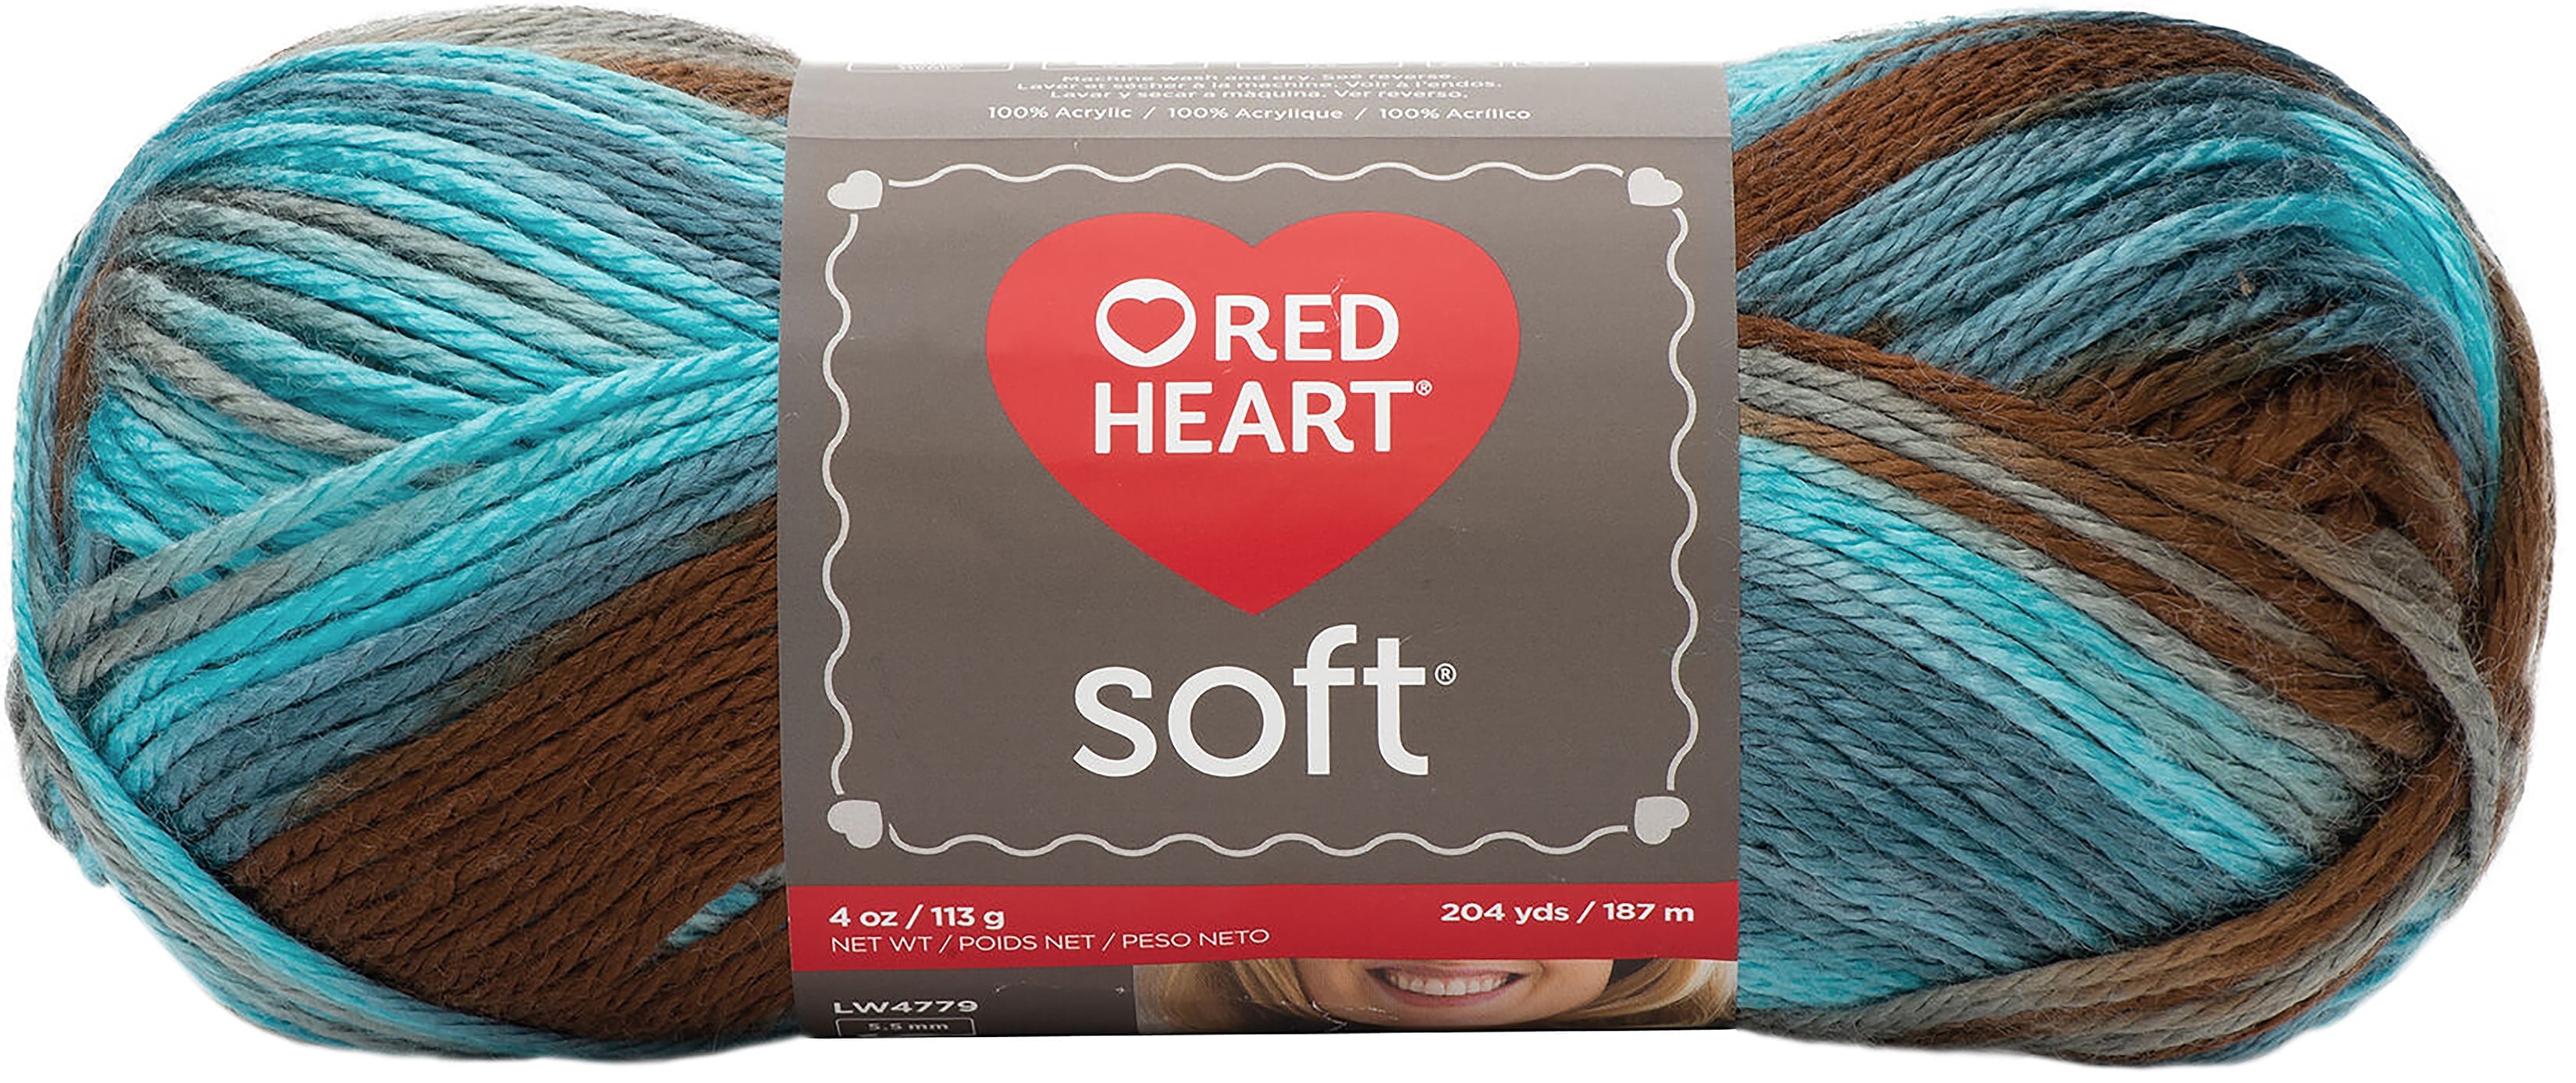 Red Heart Soft Yarn-Waterscape - image 1 of 2